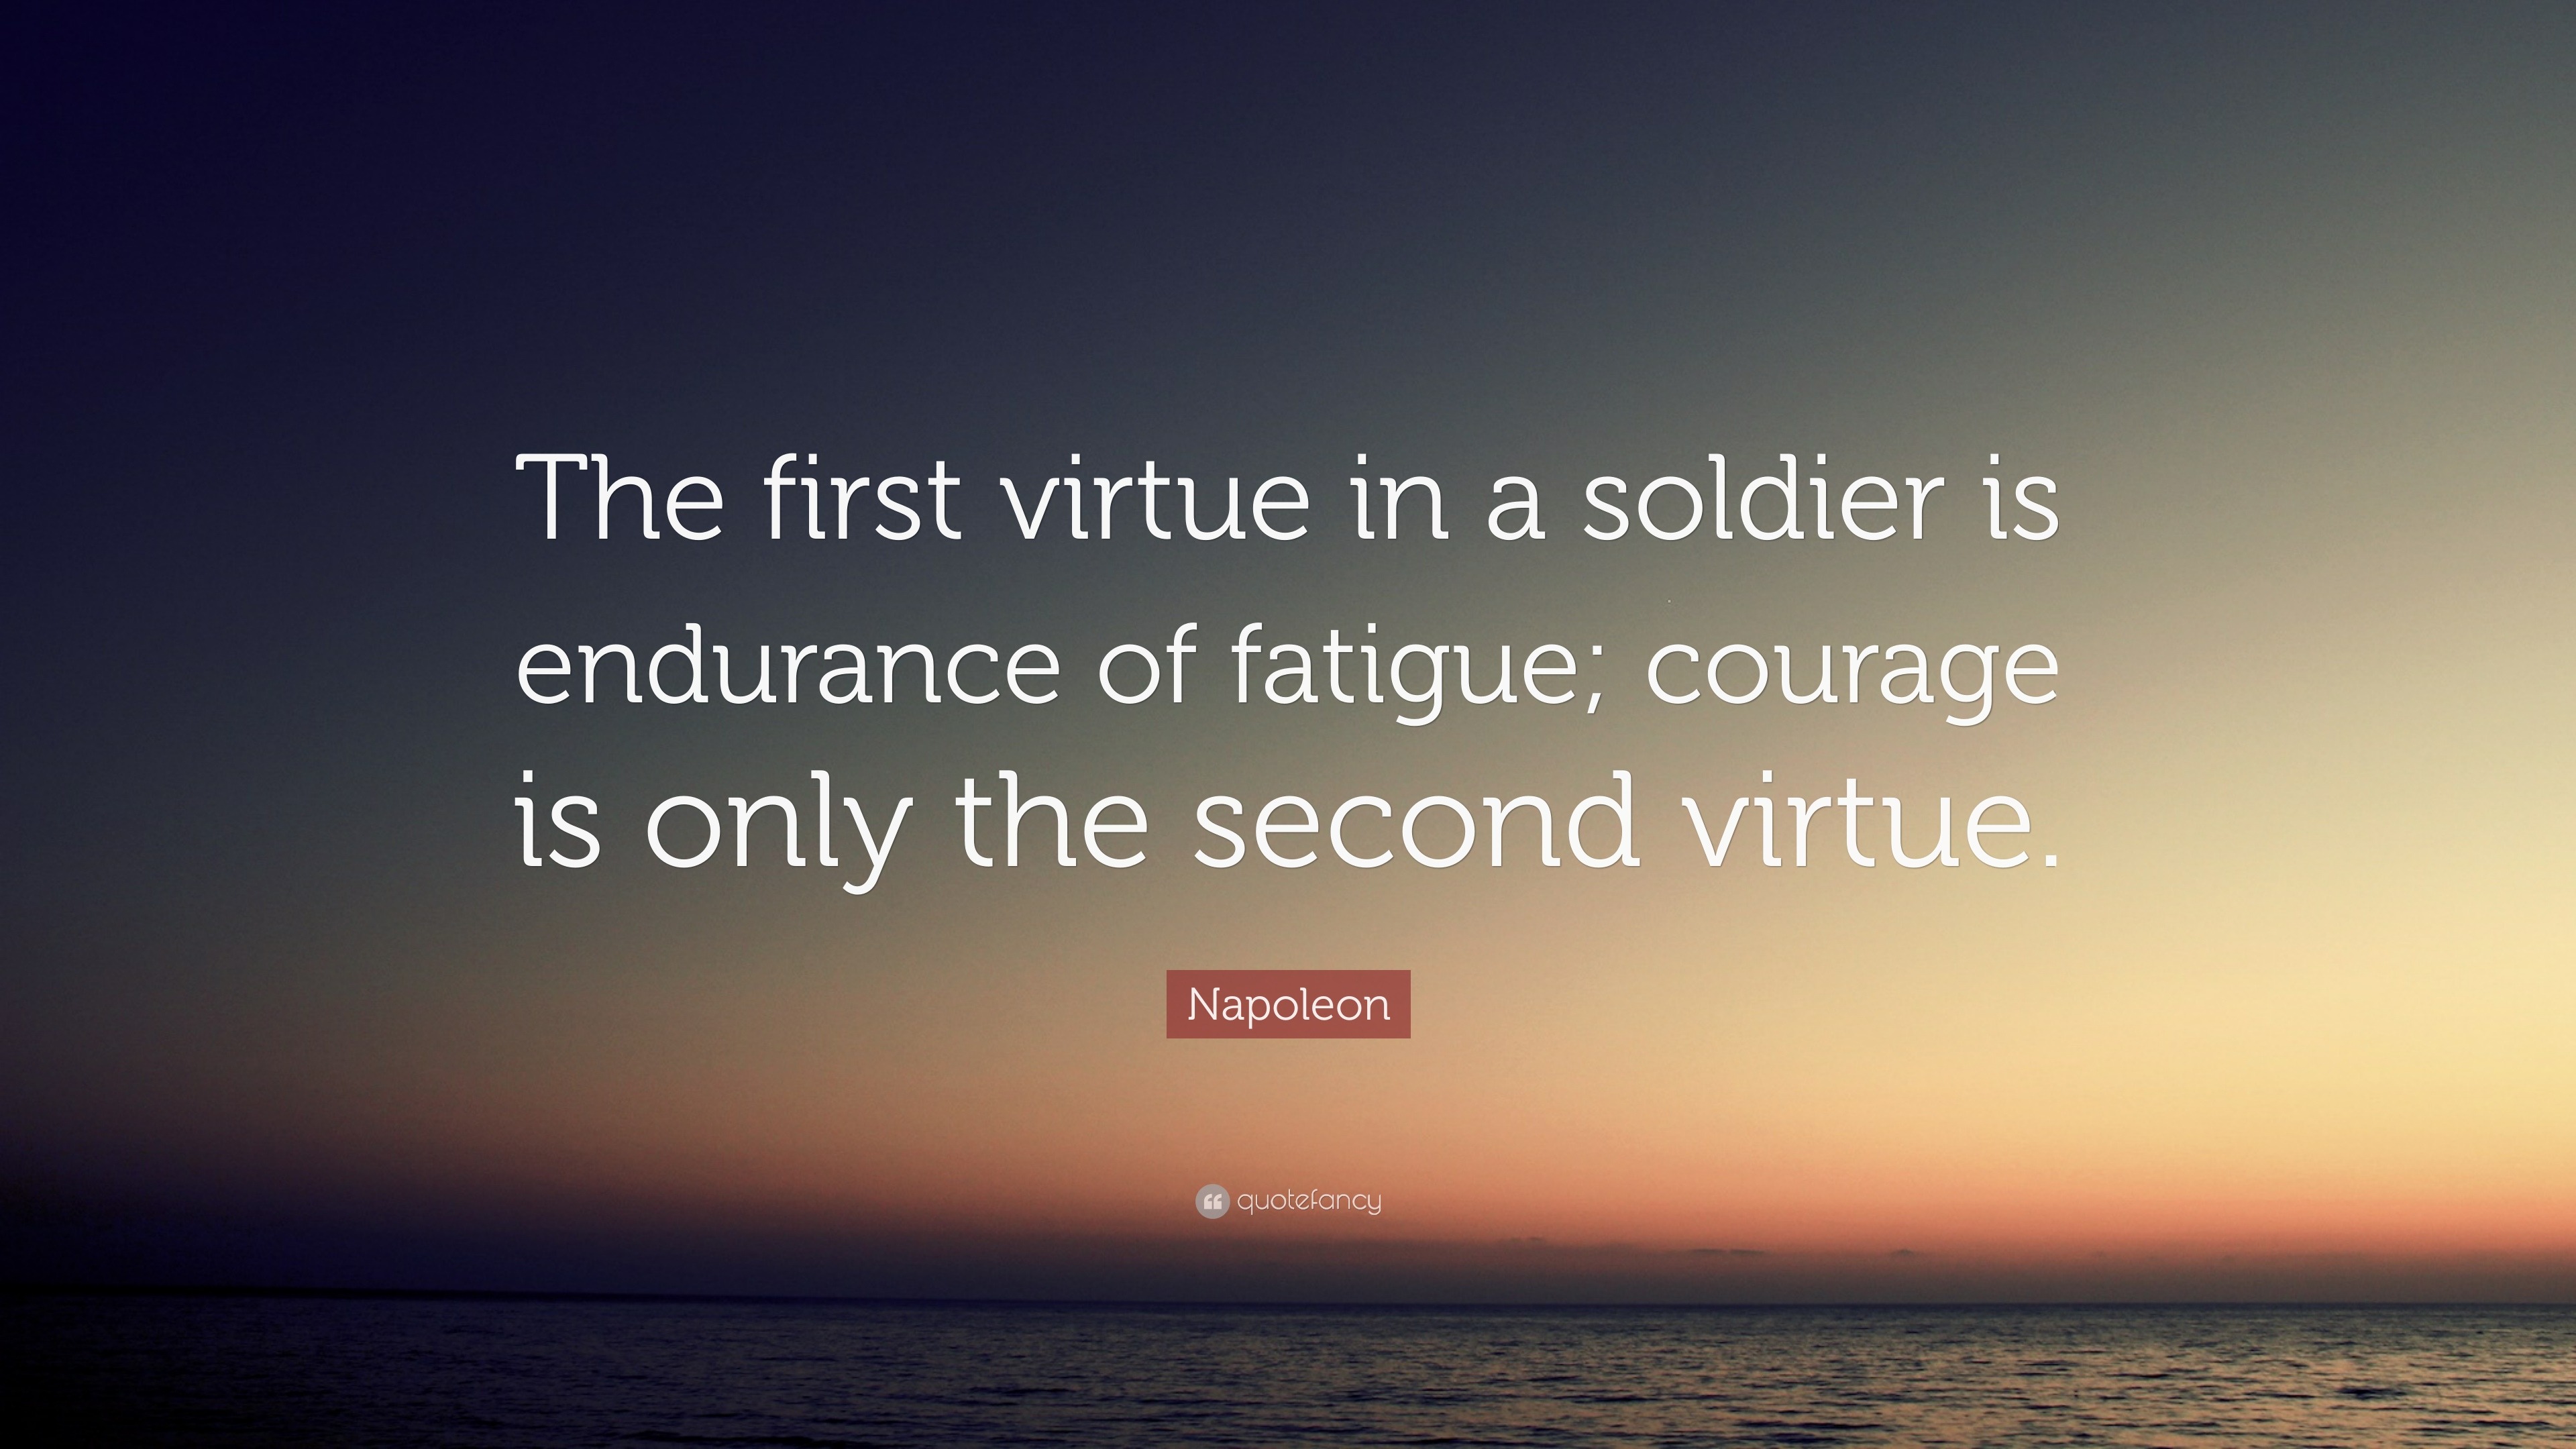 Napoleon Quote: “The first virtue in a soldier is endurance of fatigue ...